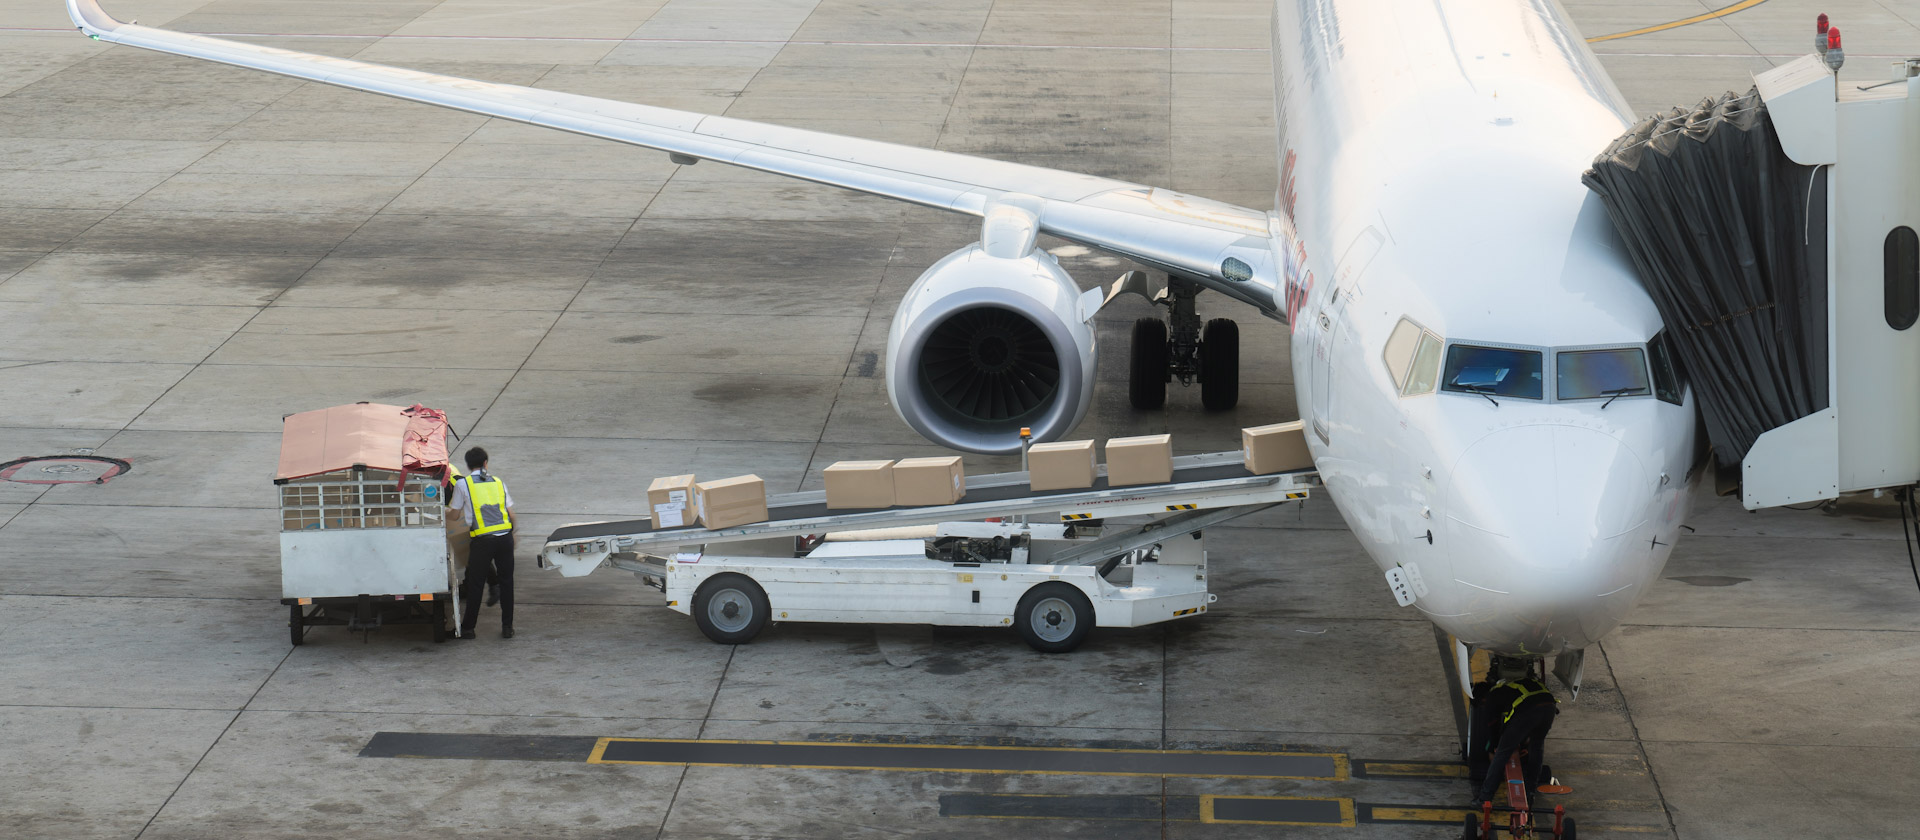 Loading cargo on the plane in airport. Cargo airplane loading or